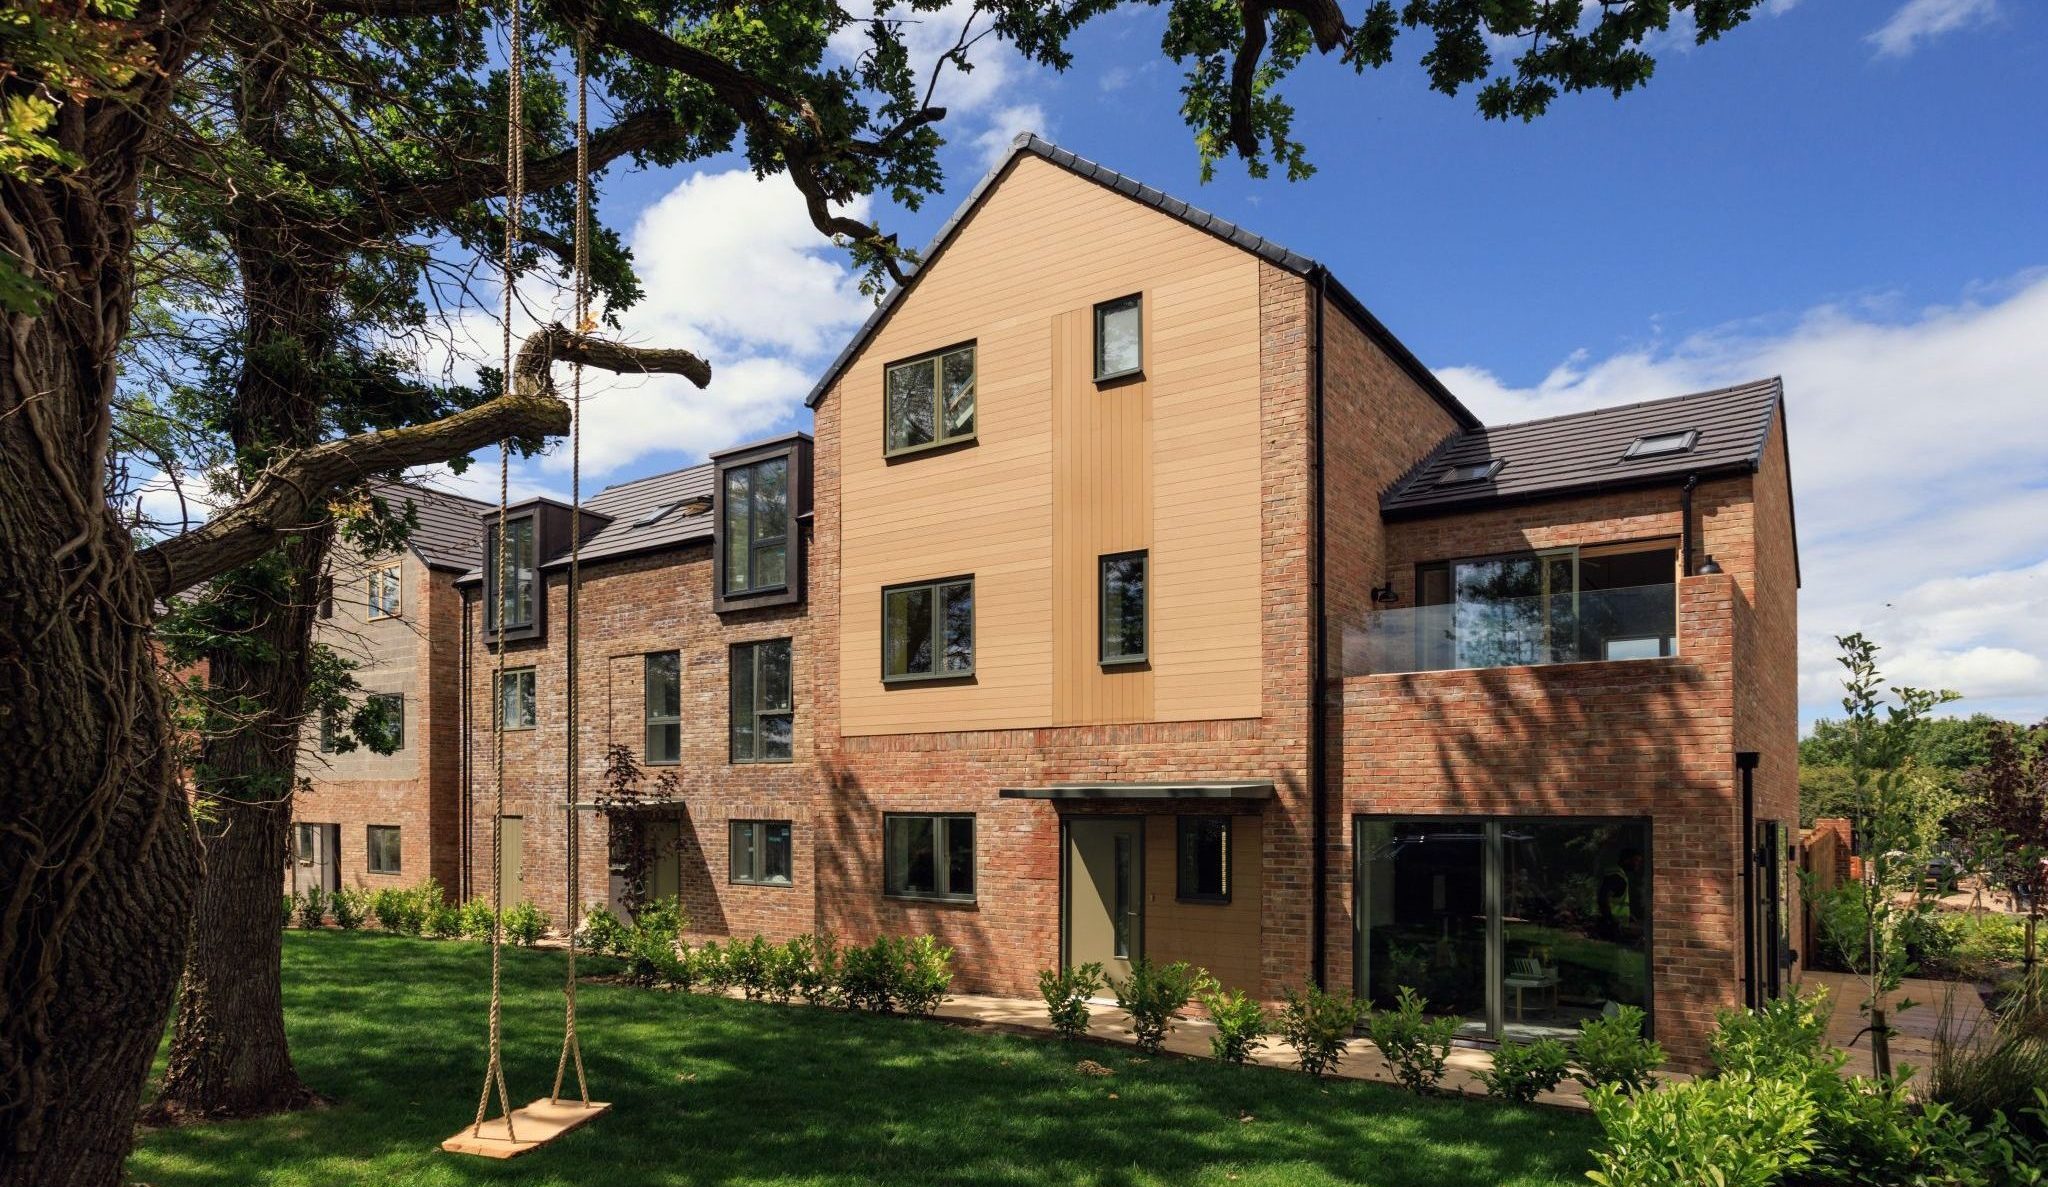 Oak Meadows Shortlisted for Residential Development of the Year